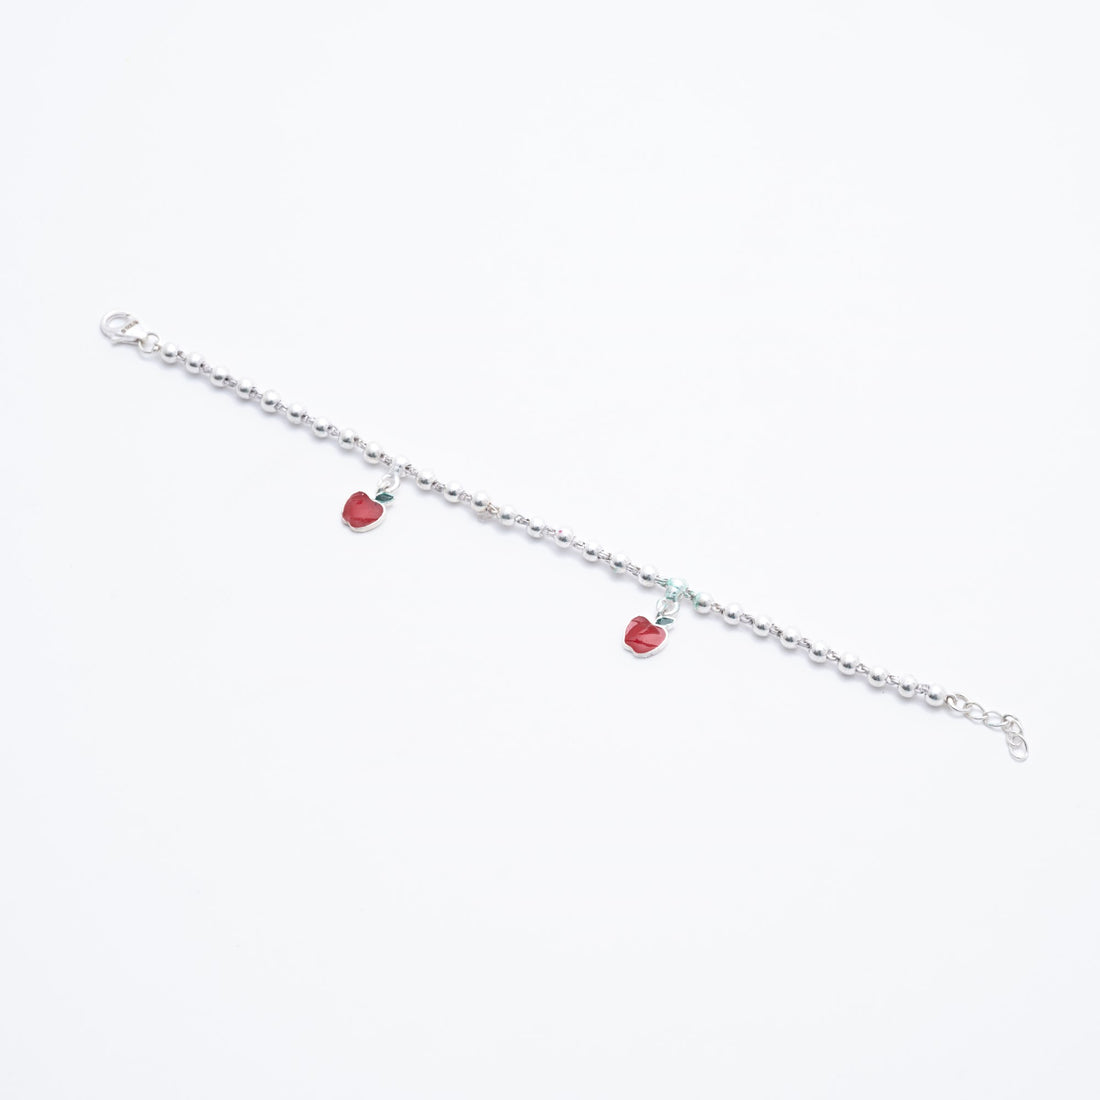 Silver with Hanging Apples Bracelet for Women